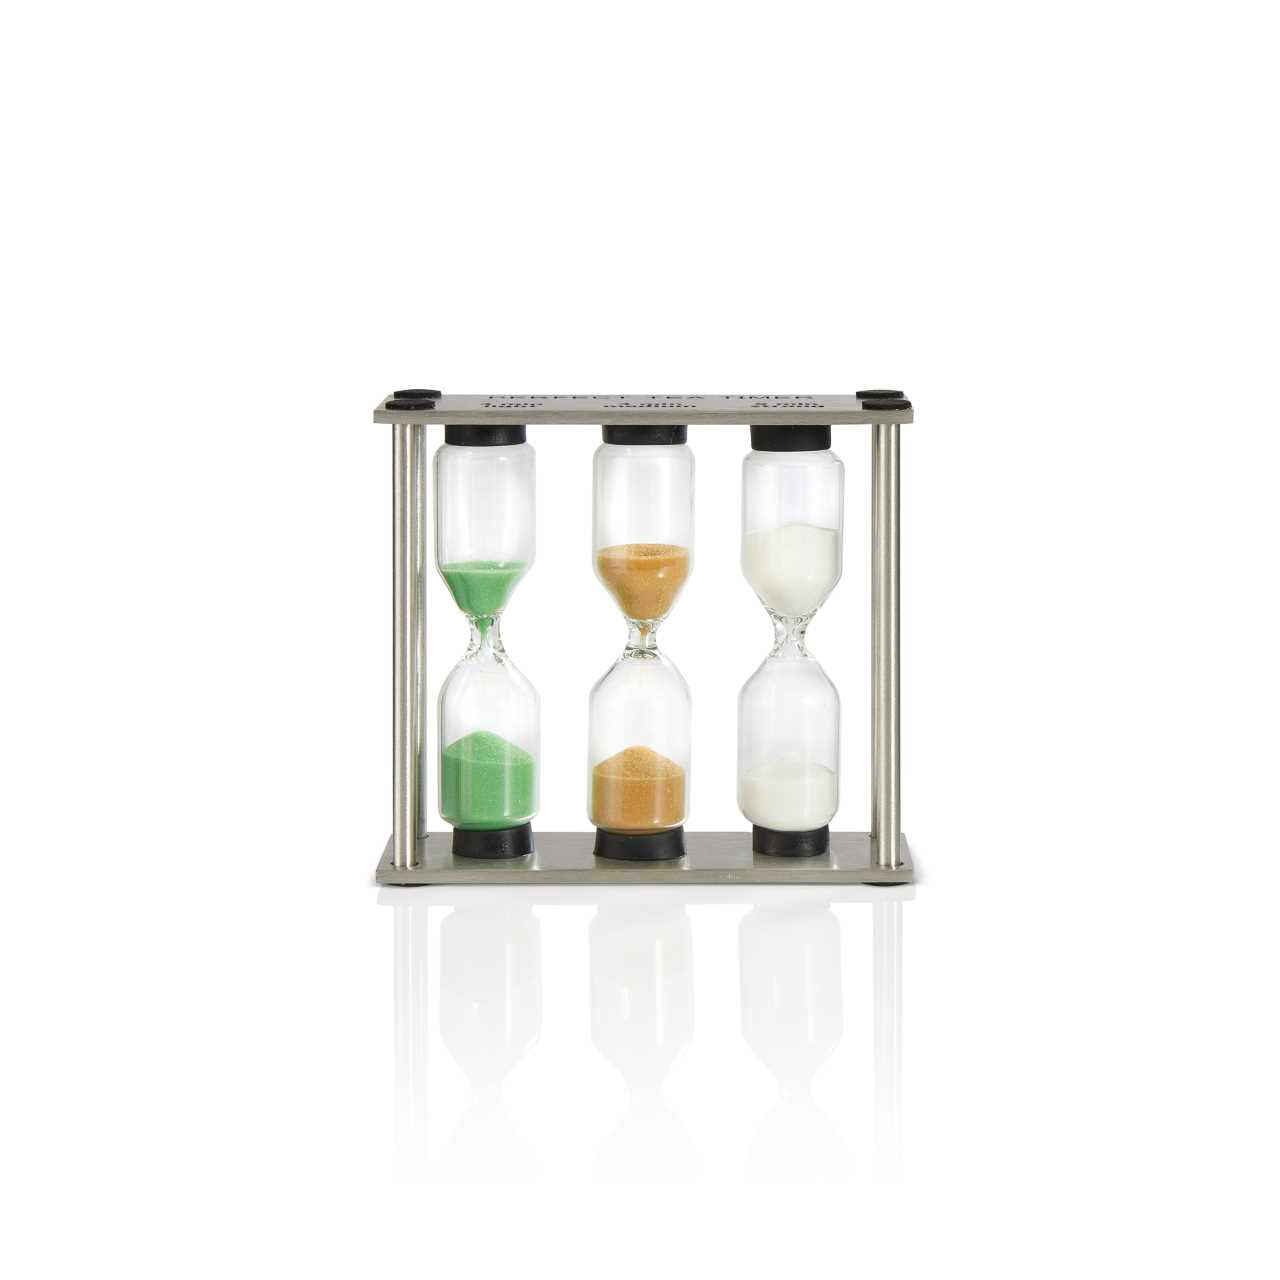 Tea Timer with different sand colour hour glasses to measure 3, 4 and 5 minutes